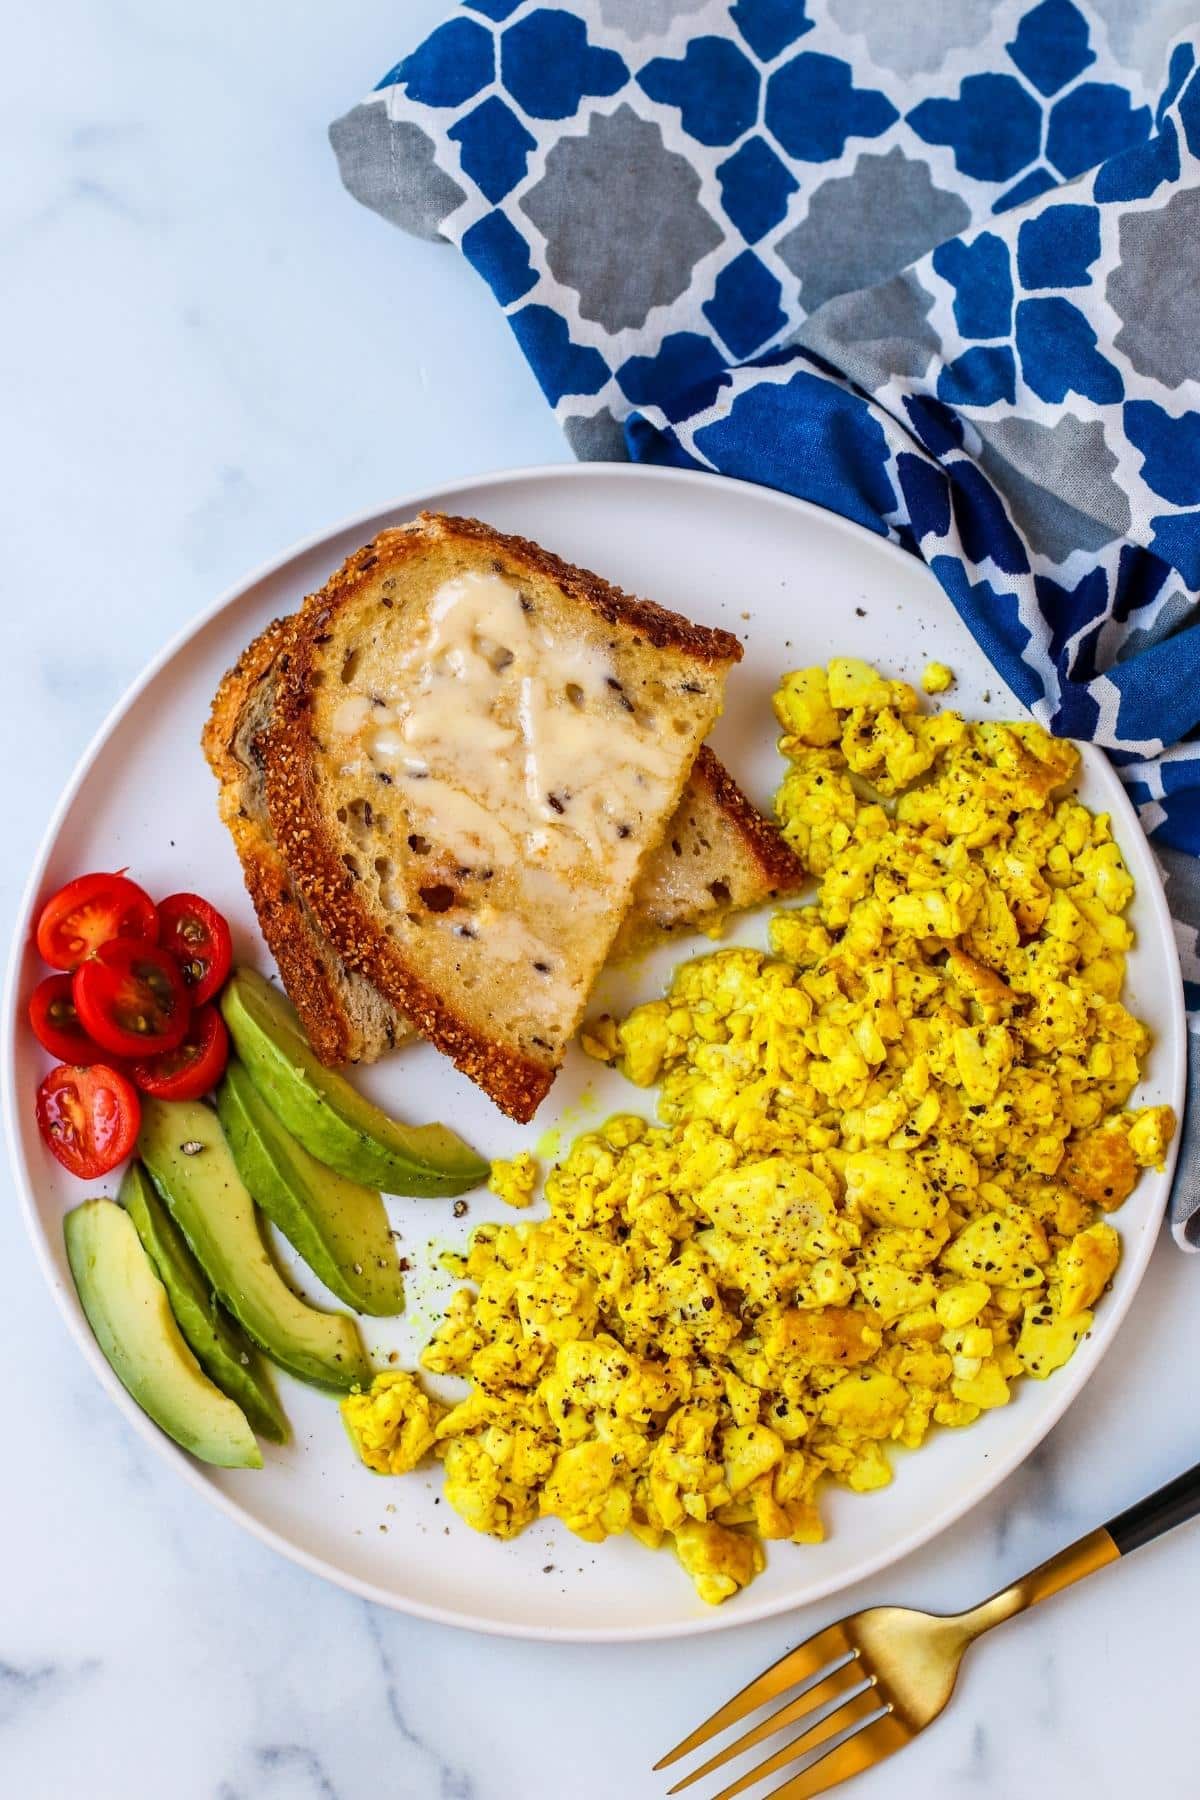 Silken Tofu Scramble on a plate with toast and sliced avocado and tomatoes with gold fork and blue pattered napkin.